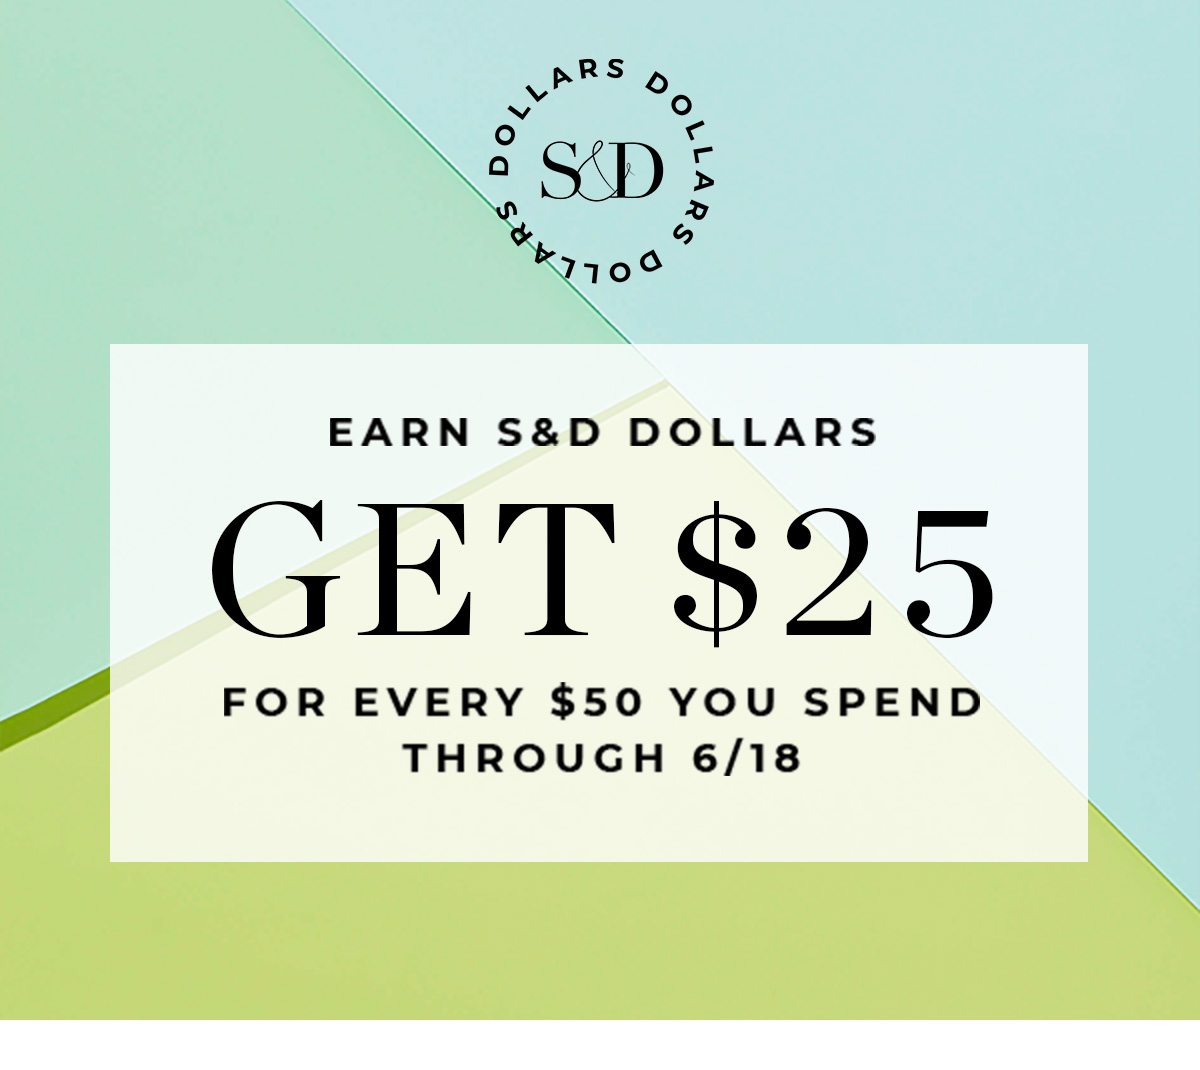 Earn S&D Dollars Get $25 for every $50 you spend through 6/18